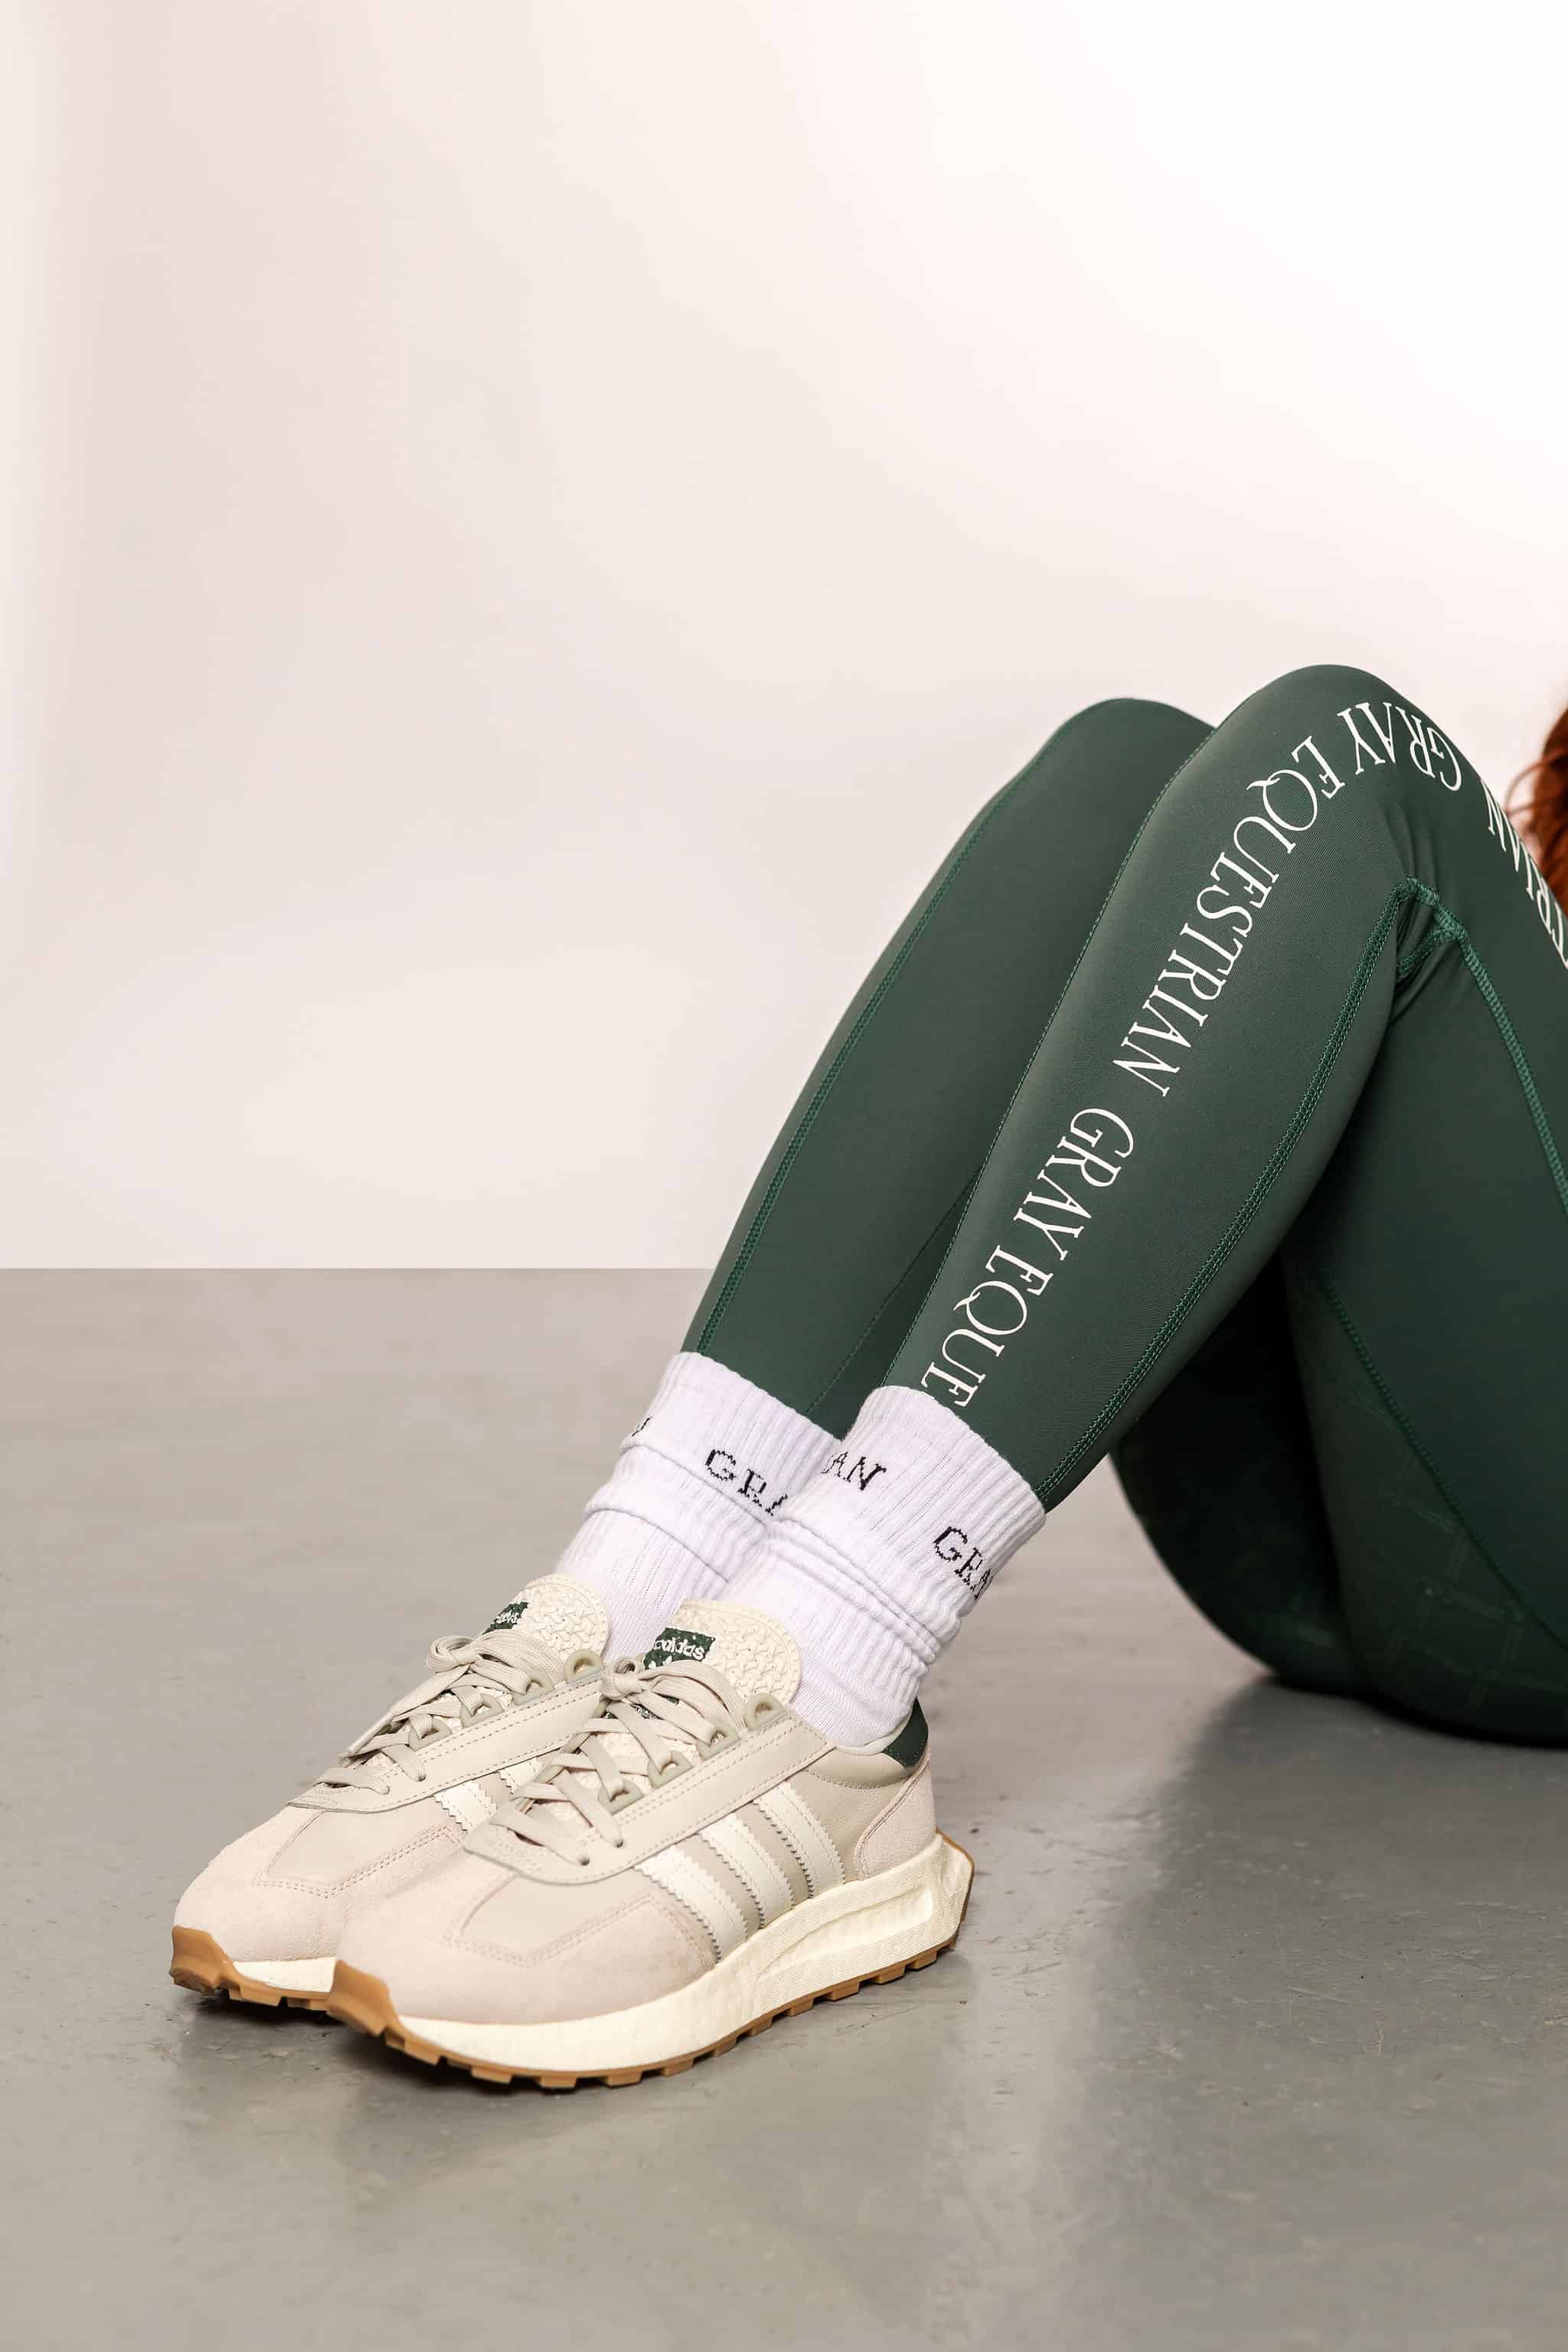 A close up of our green renew riding leggings and white performance socks.